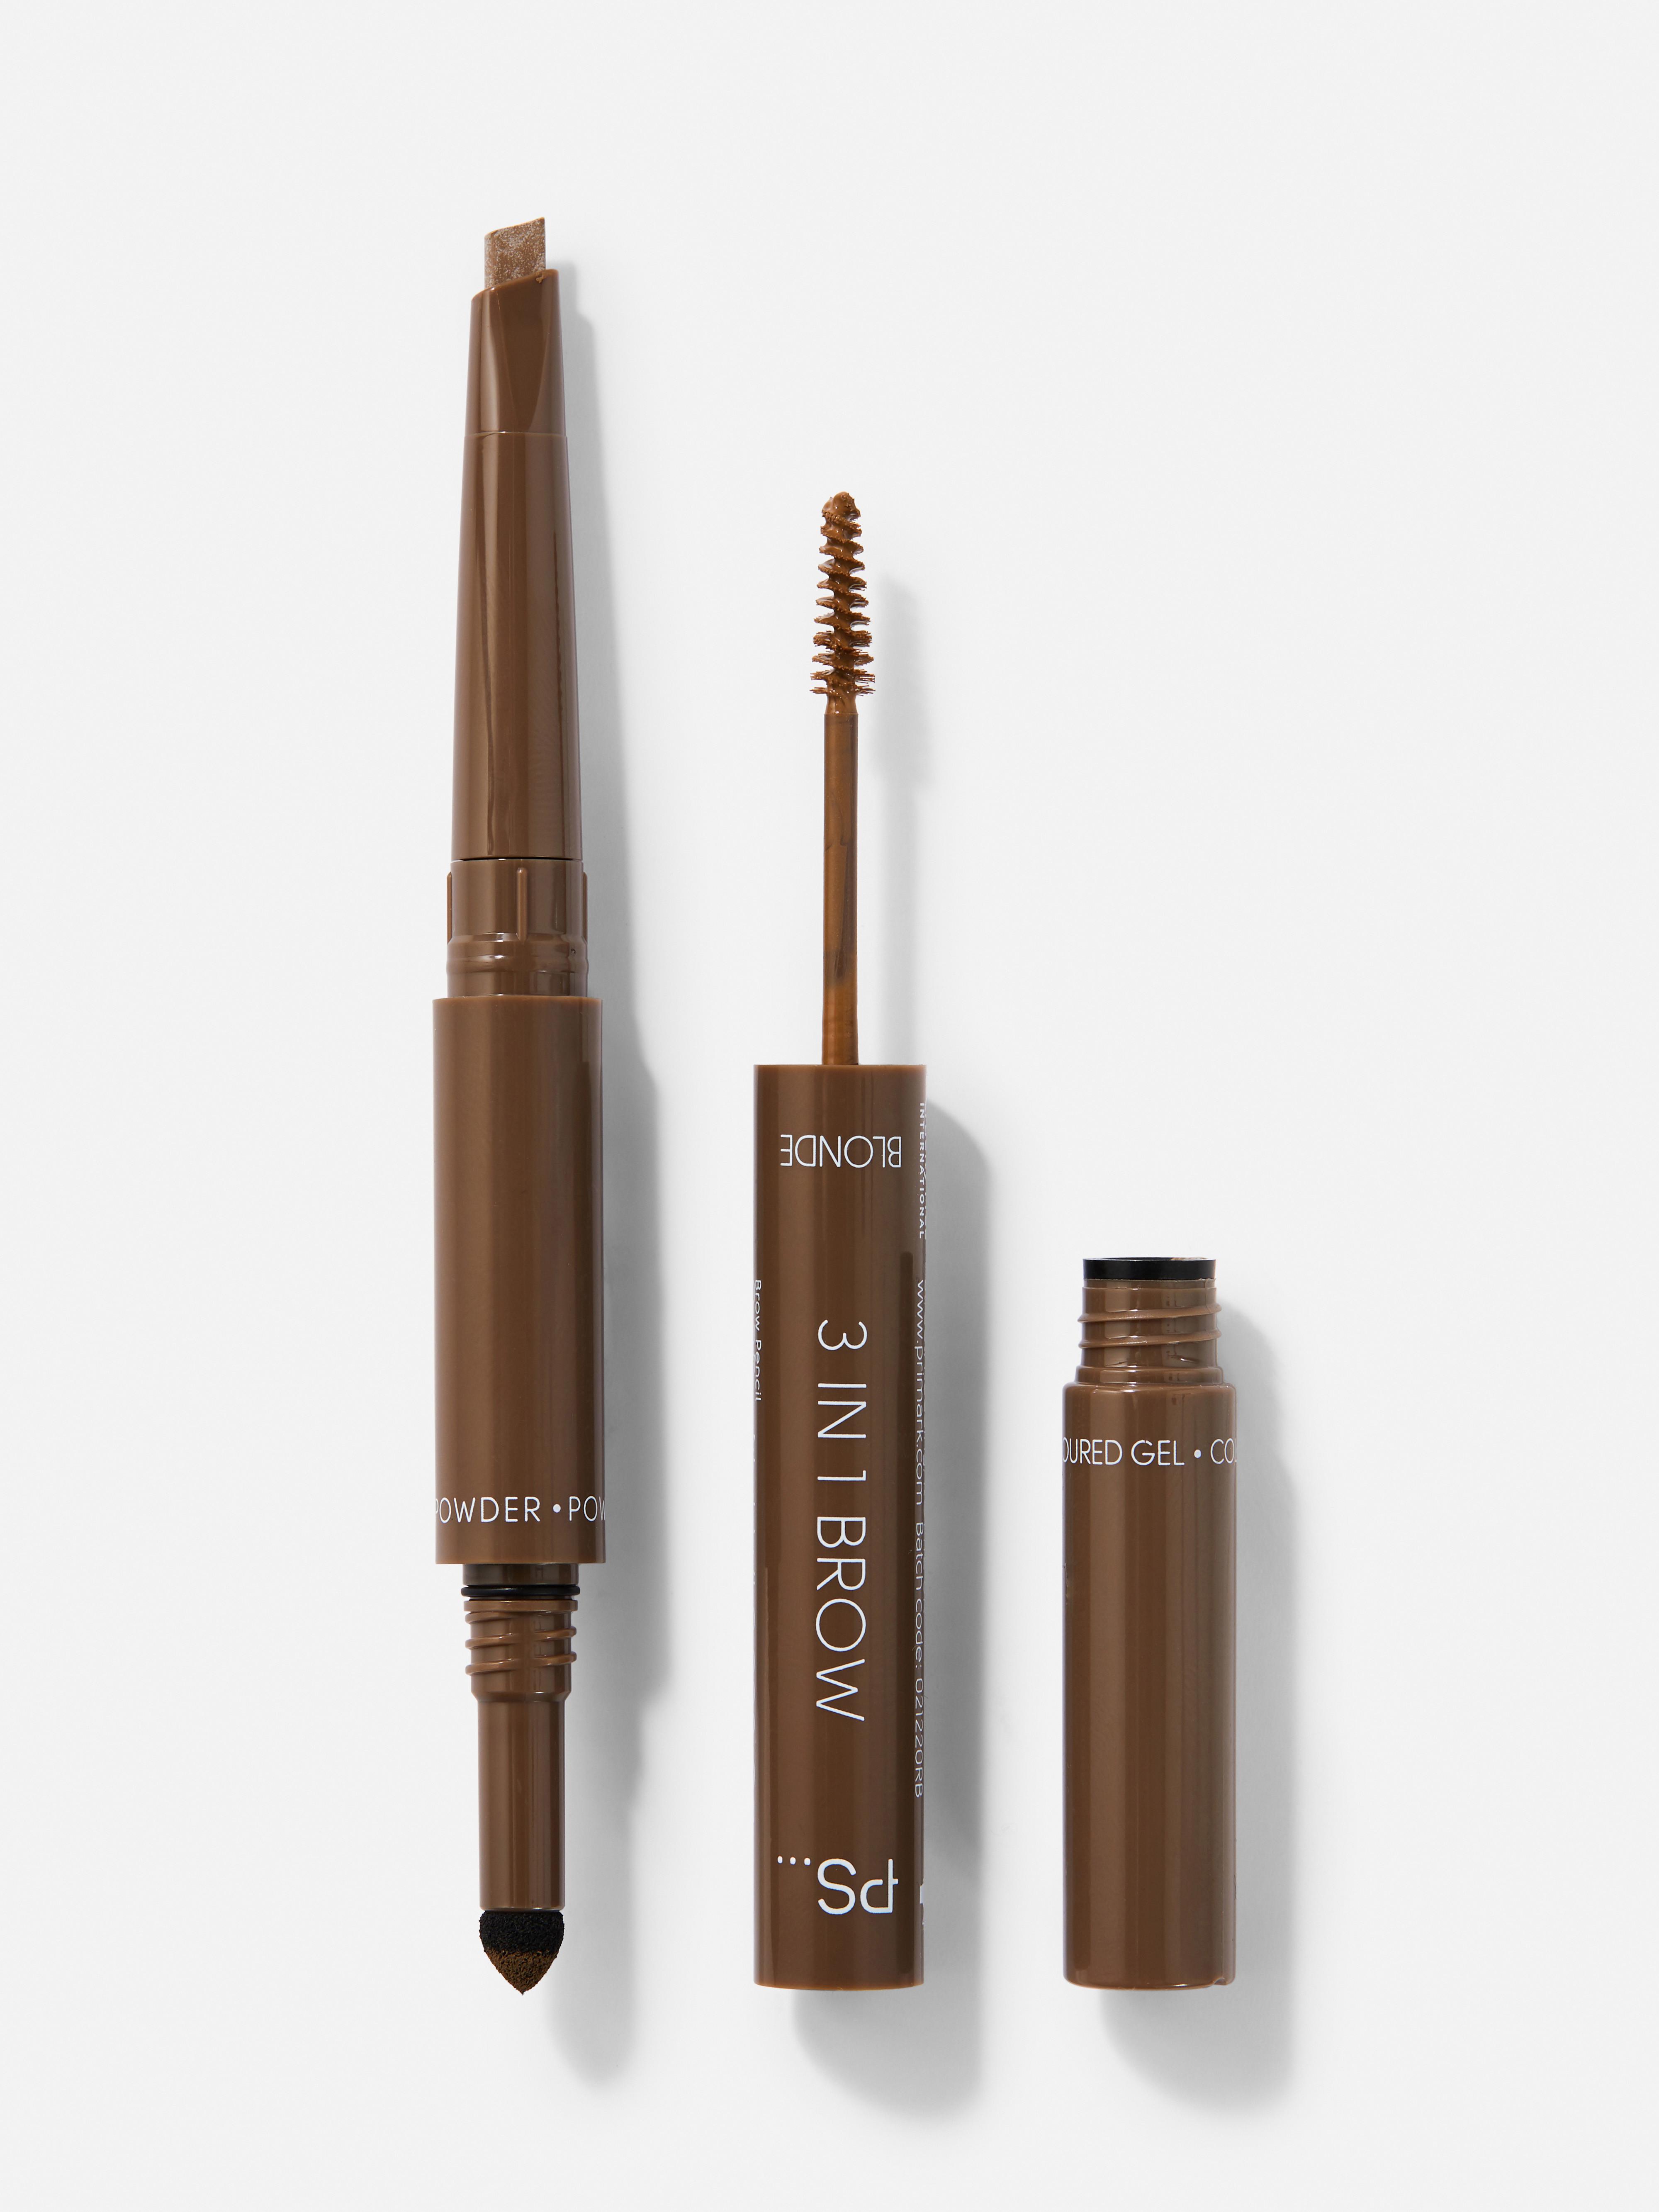 PS 3 in 1 Brow Set